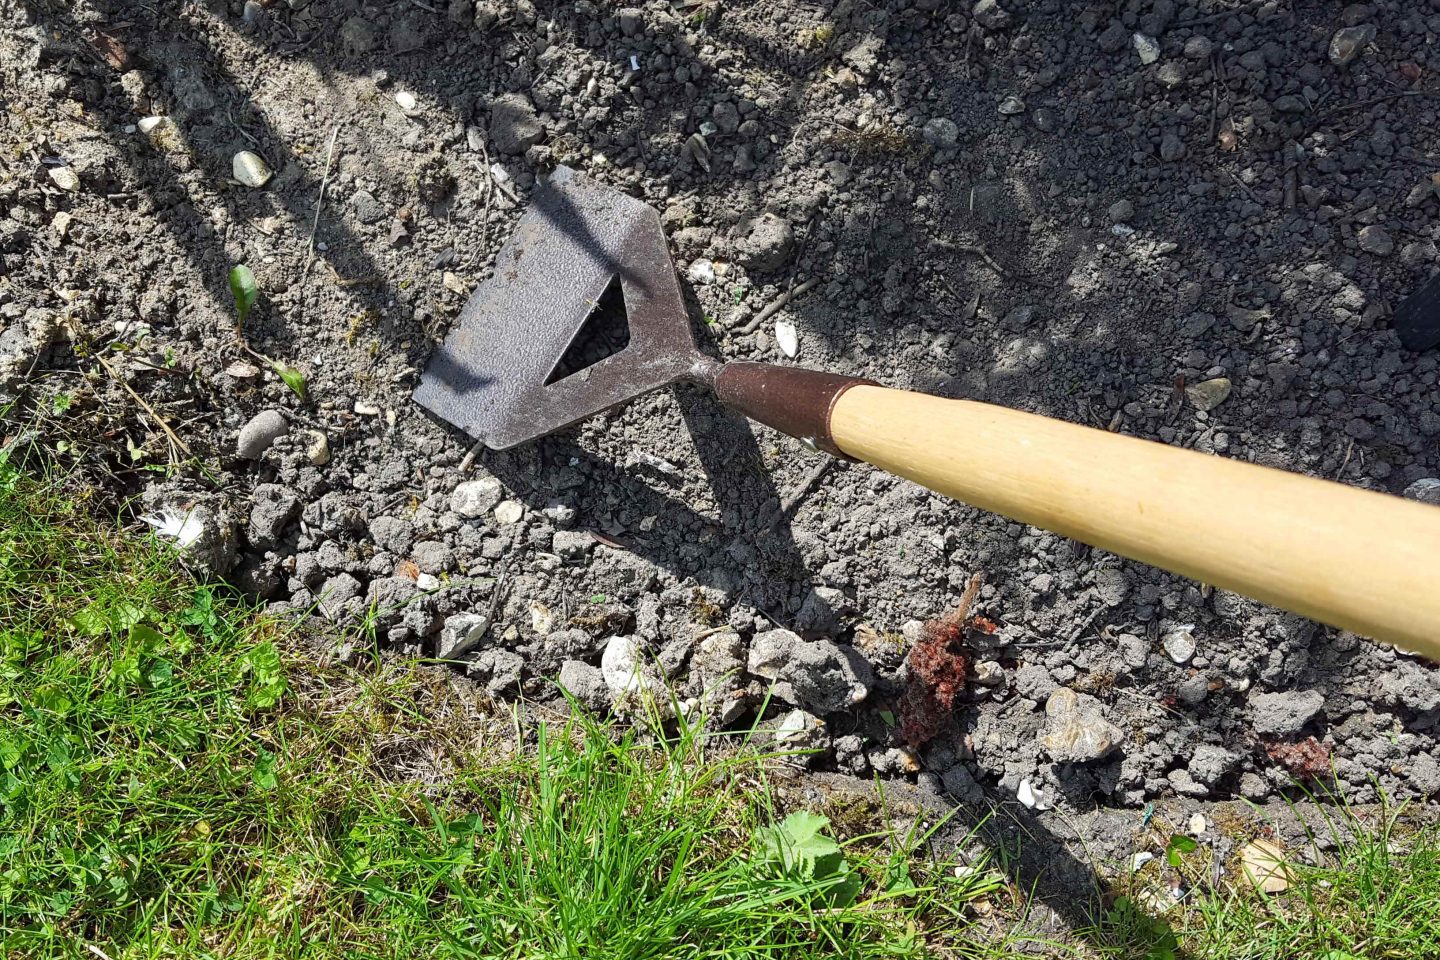 A hoe used for weeding and sowing